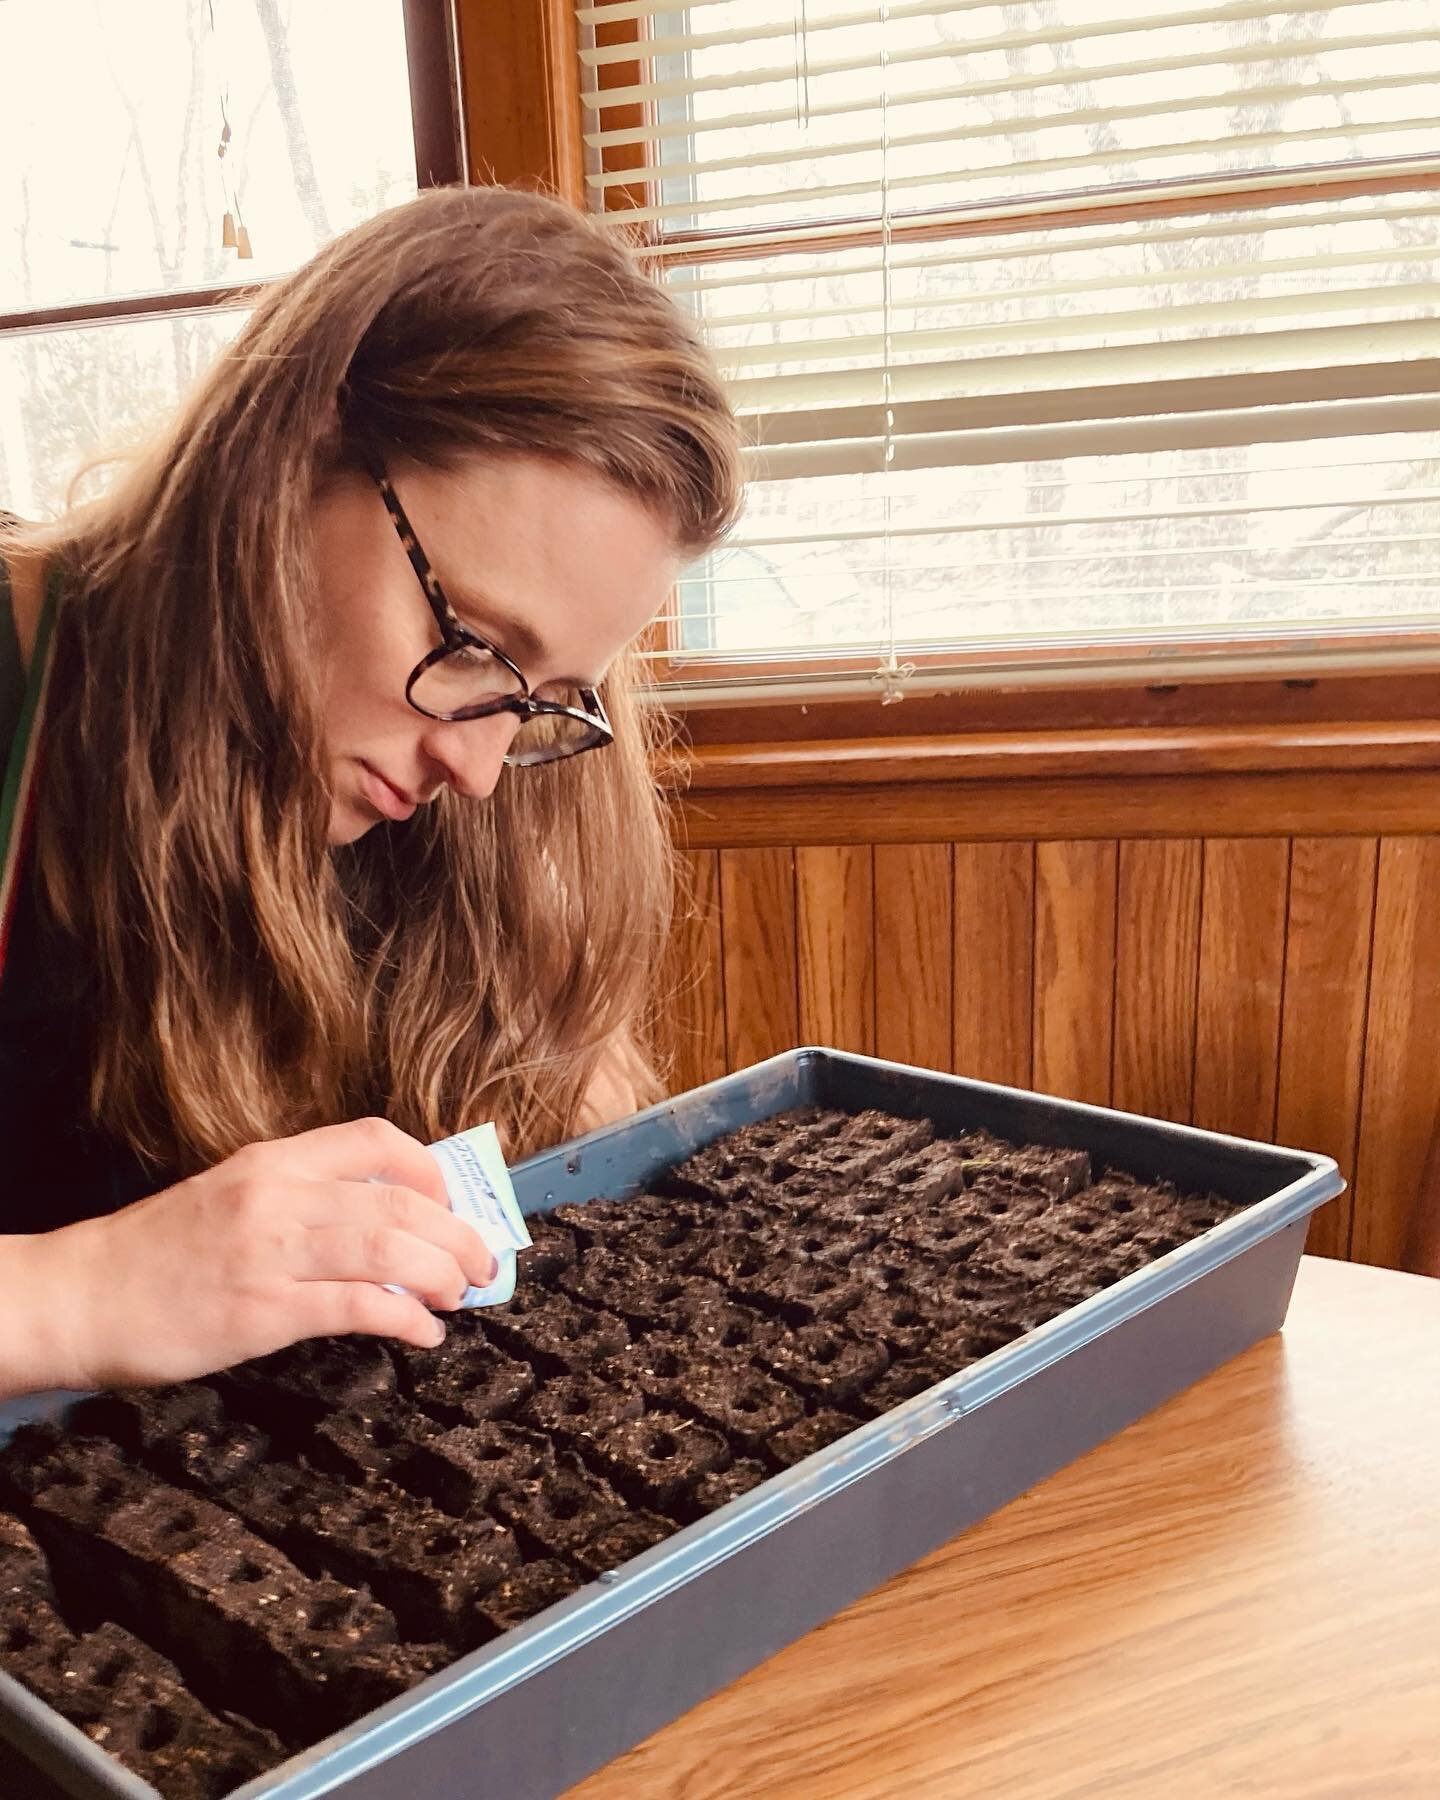 Seed sowing Sunday today. What are you tackling today?
#seedsowing #slowdowntime #calmandquiet #growyourownflowers #sowseeds #grownnotflown #zone4b #flowercsa #flowersubscription